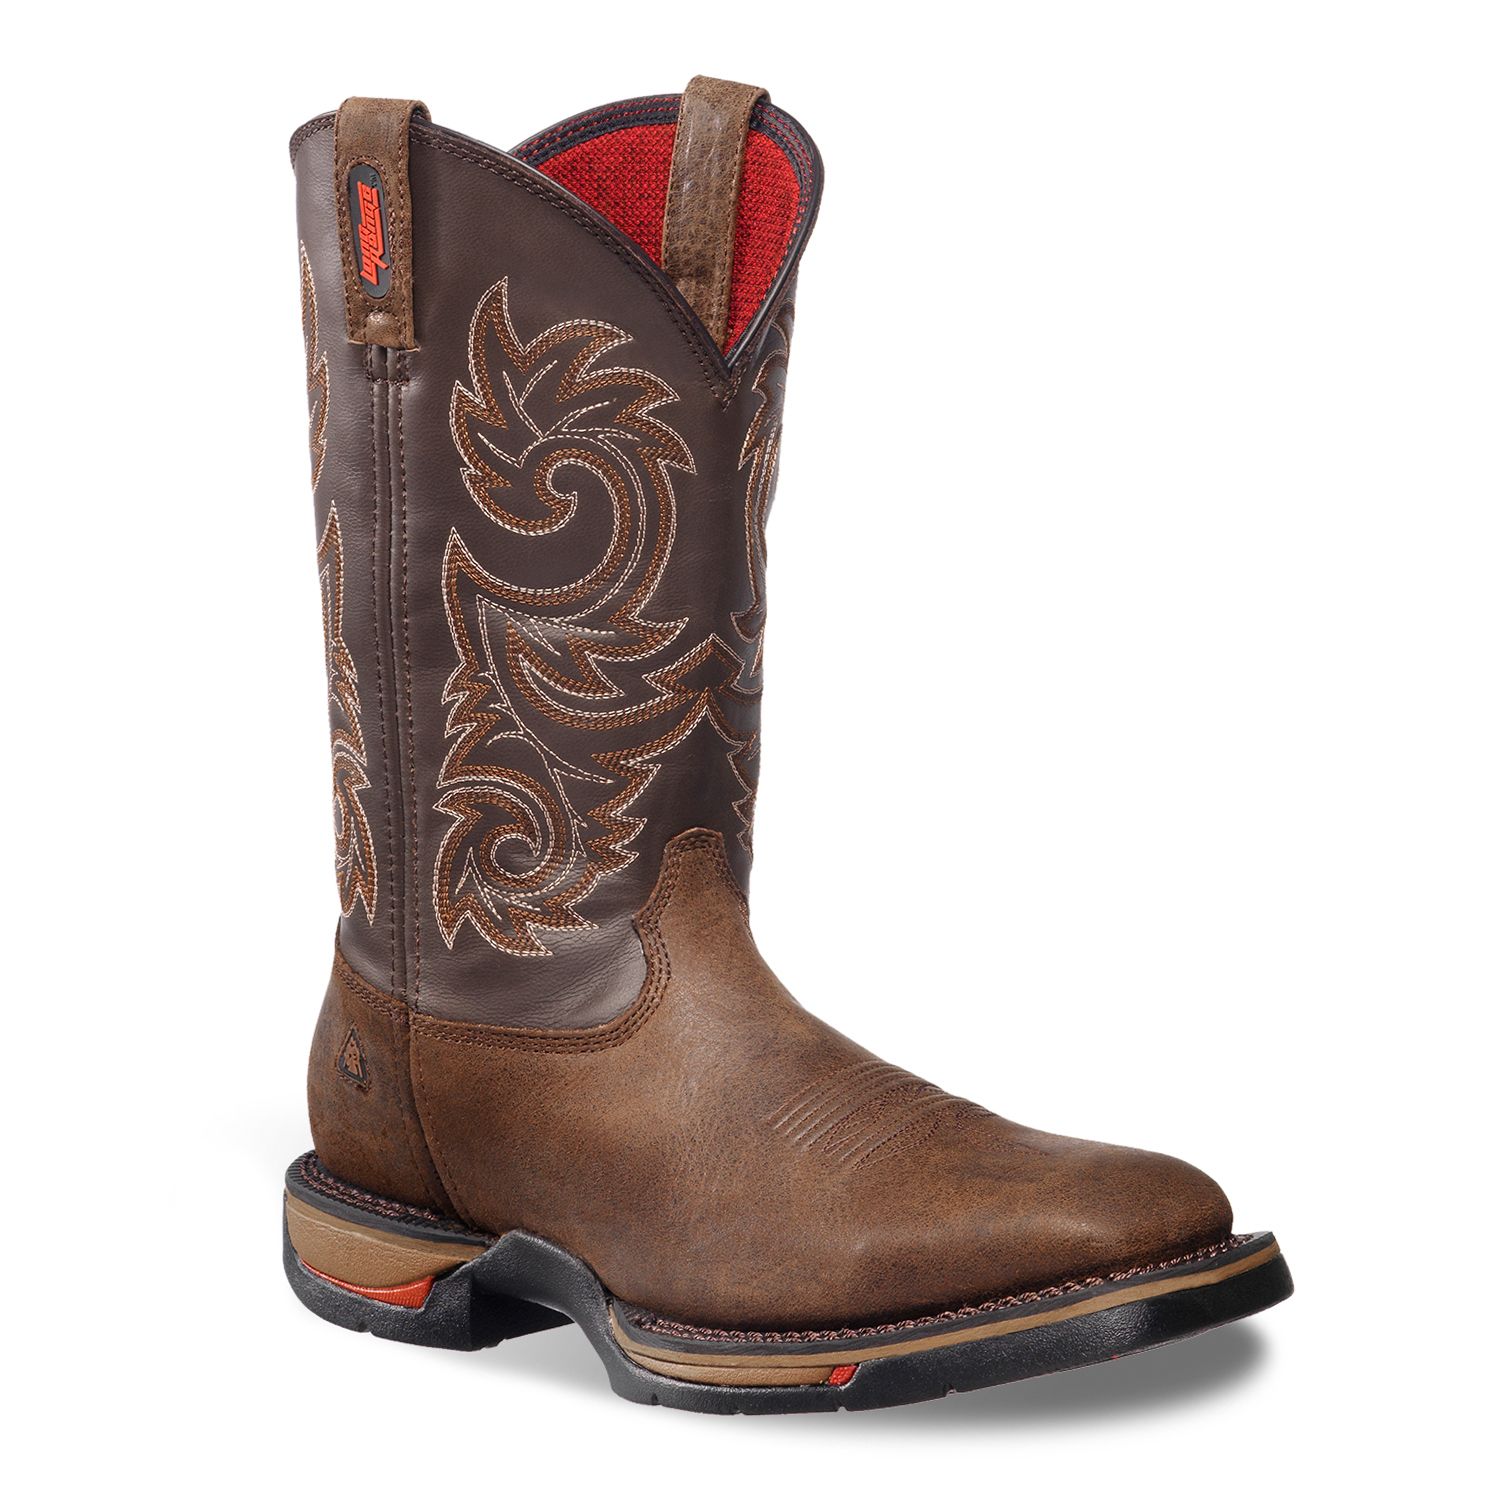 Mens Western Boots - Shoes | Kohl's